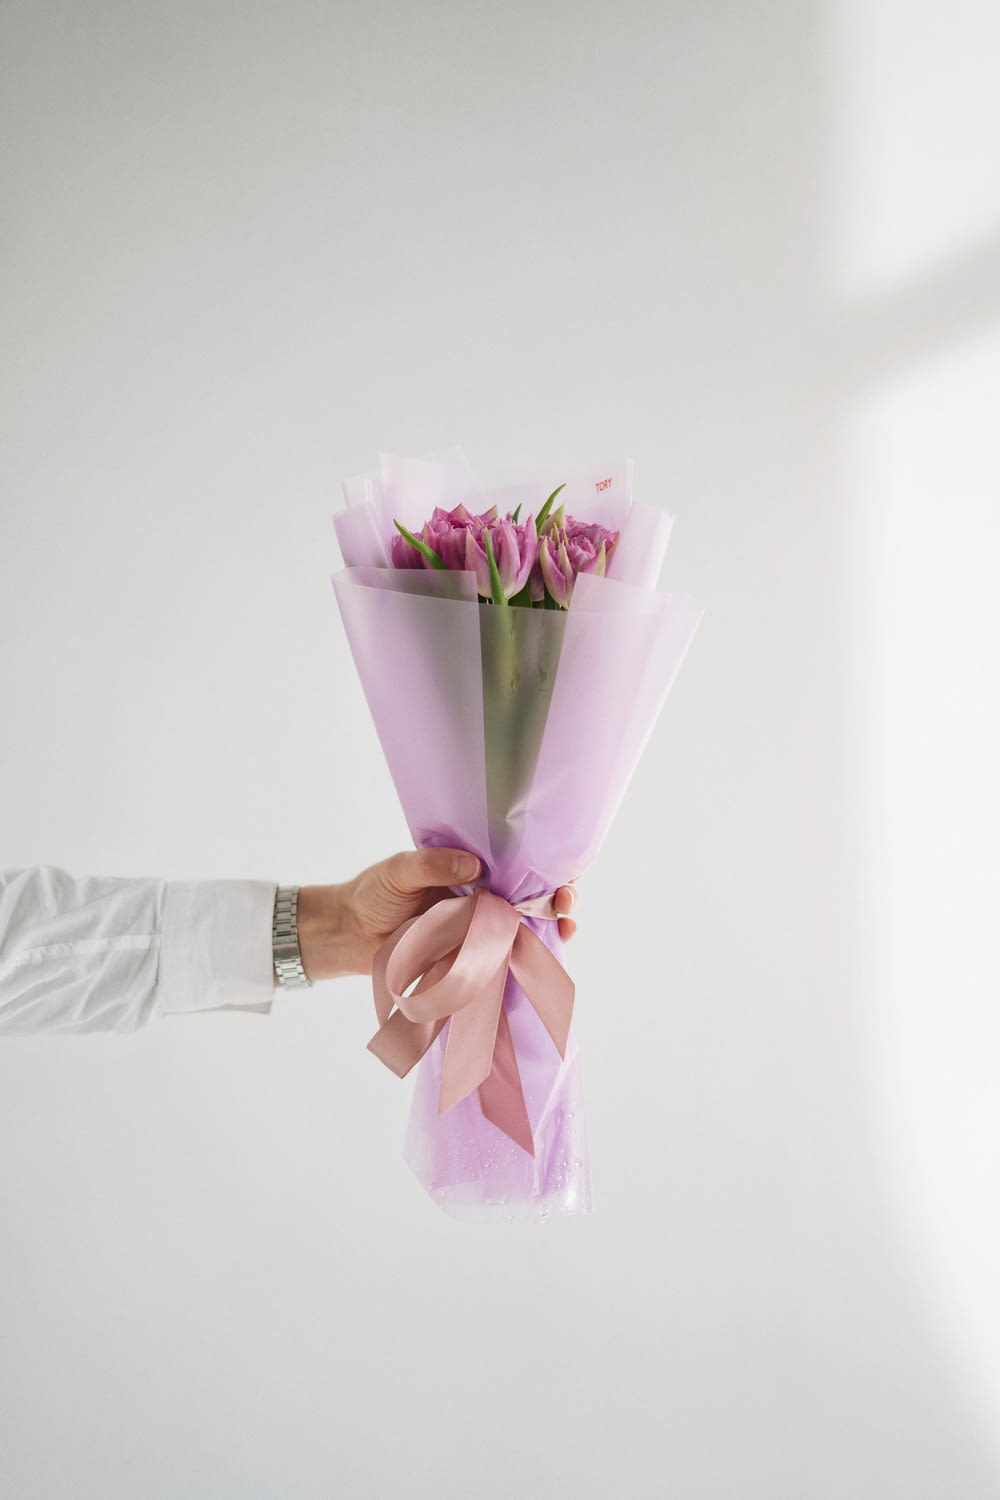 a person holding a bouquet of pink roses